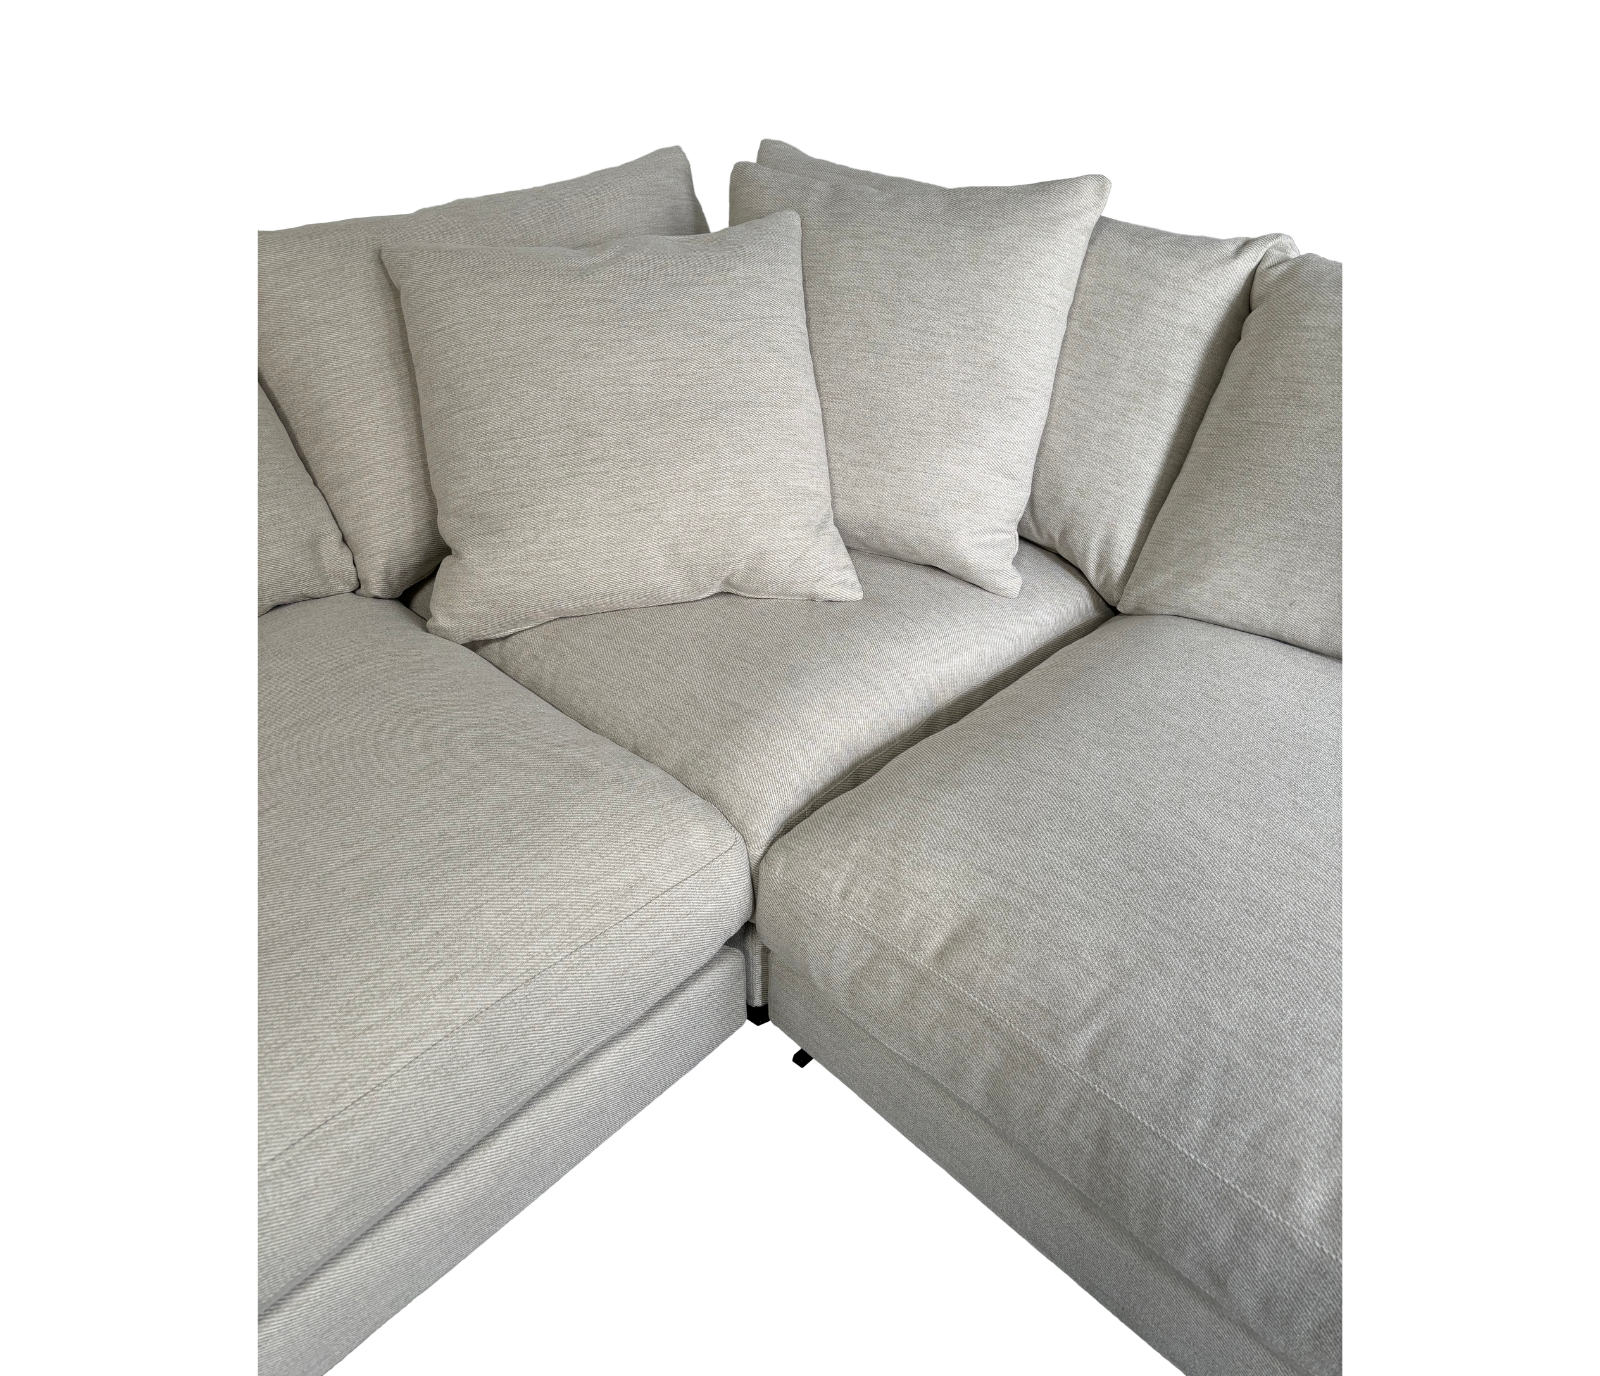 Weekender 3 Piece Sectional - Ivory Fabric